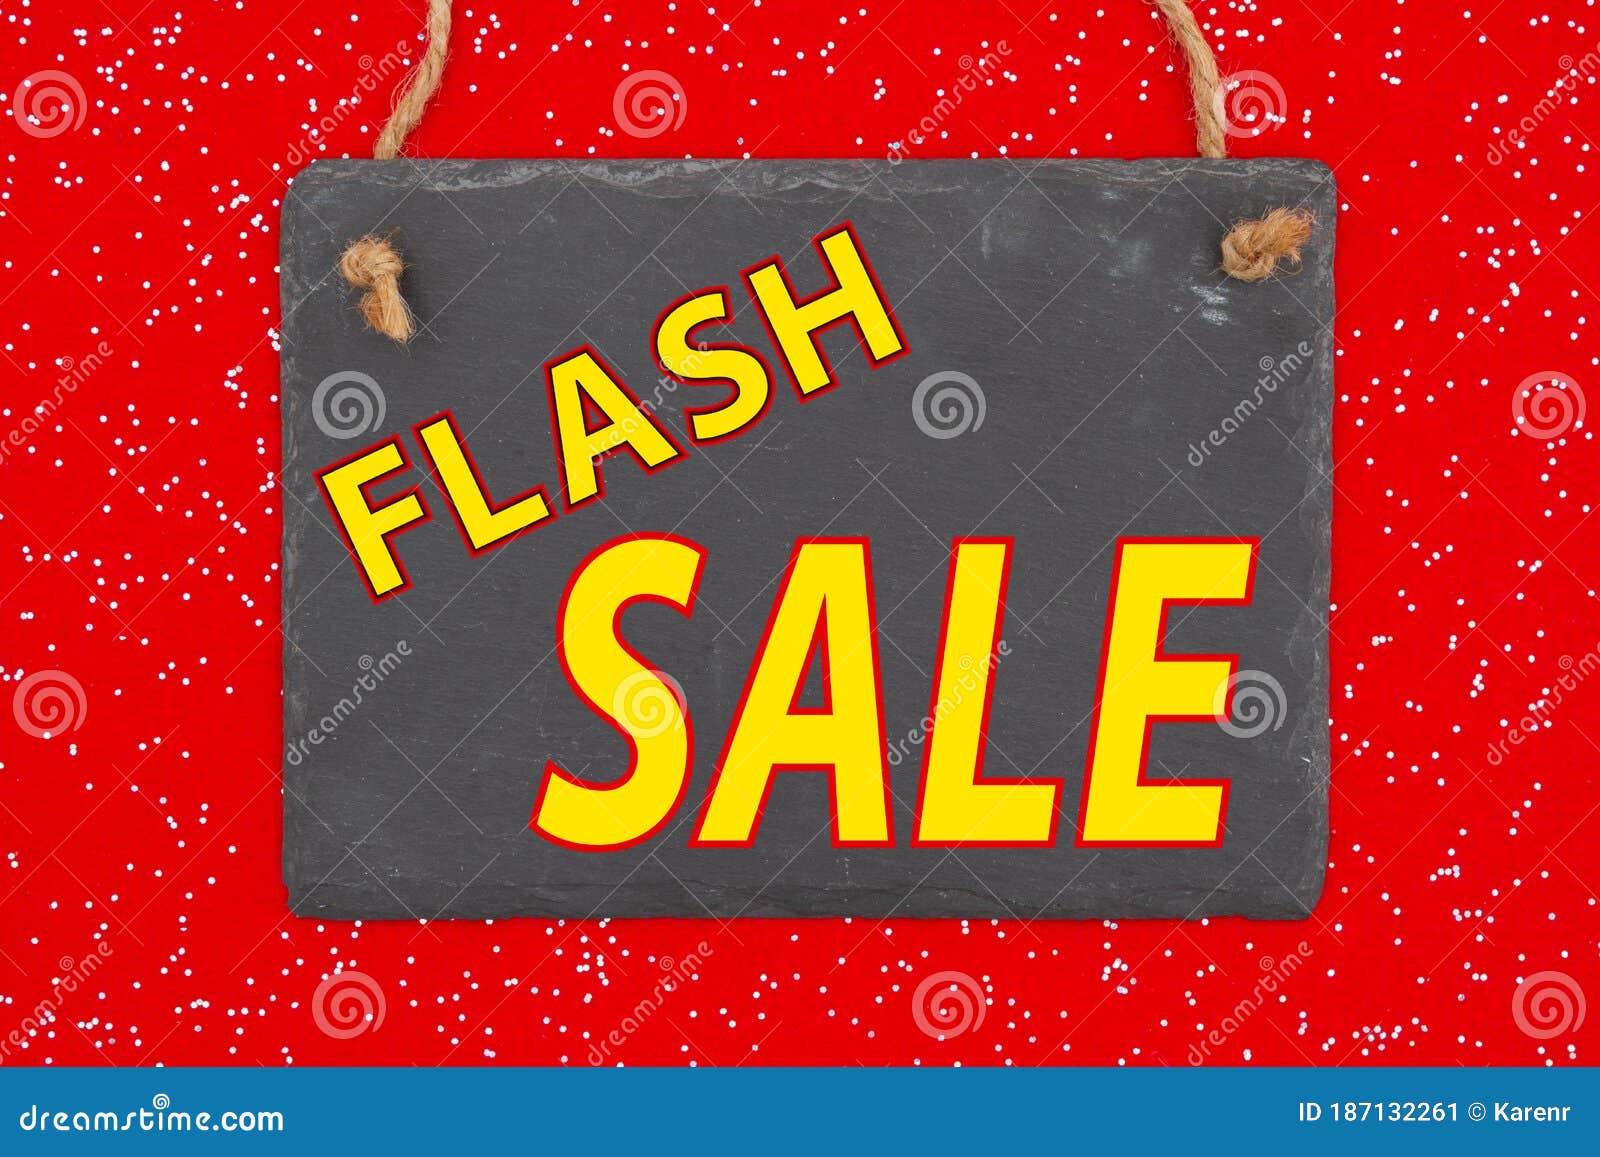 flash sale type message in a hanging blank chalkboard sign